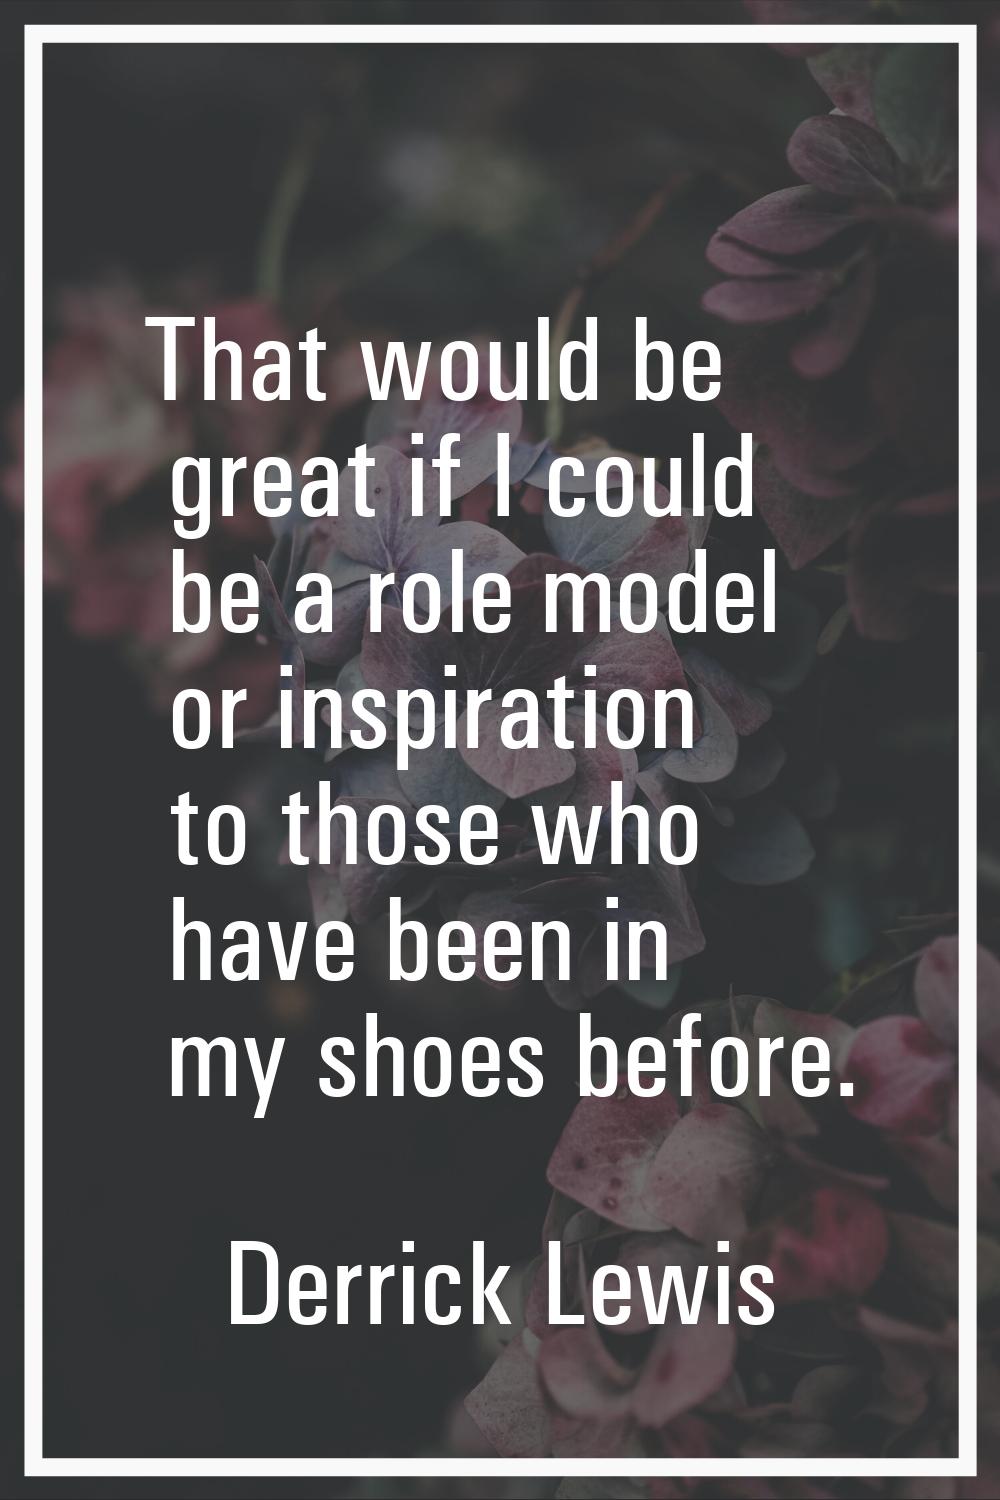 That would be great if I could be a role model or inspiration to those who have been in my shoes be